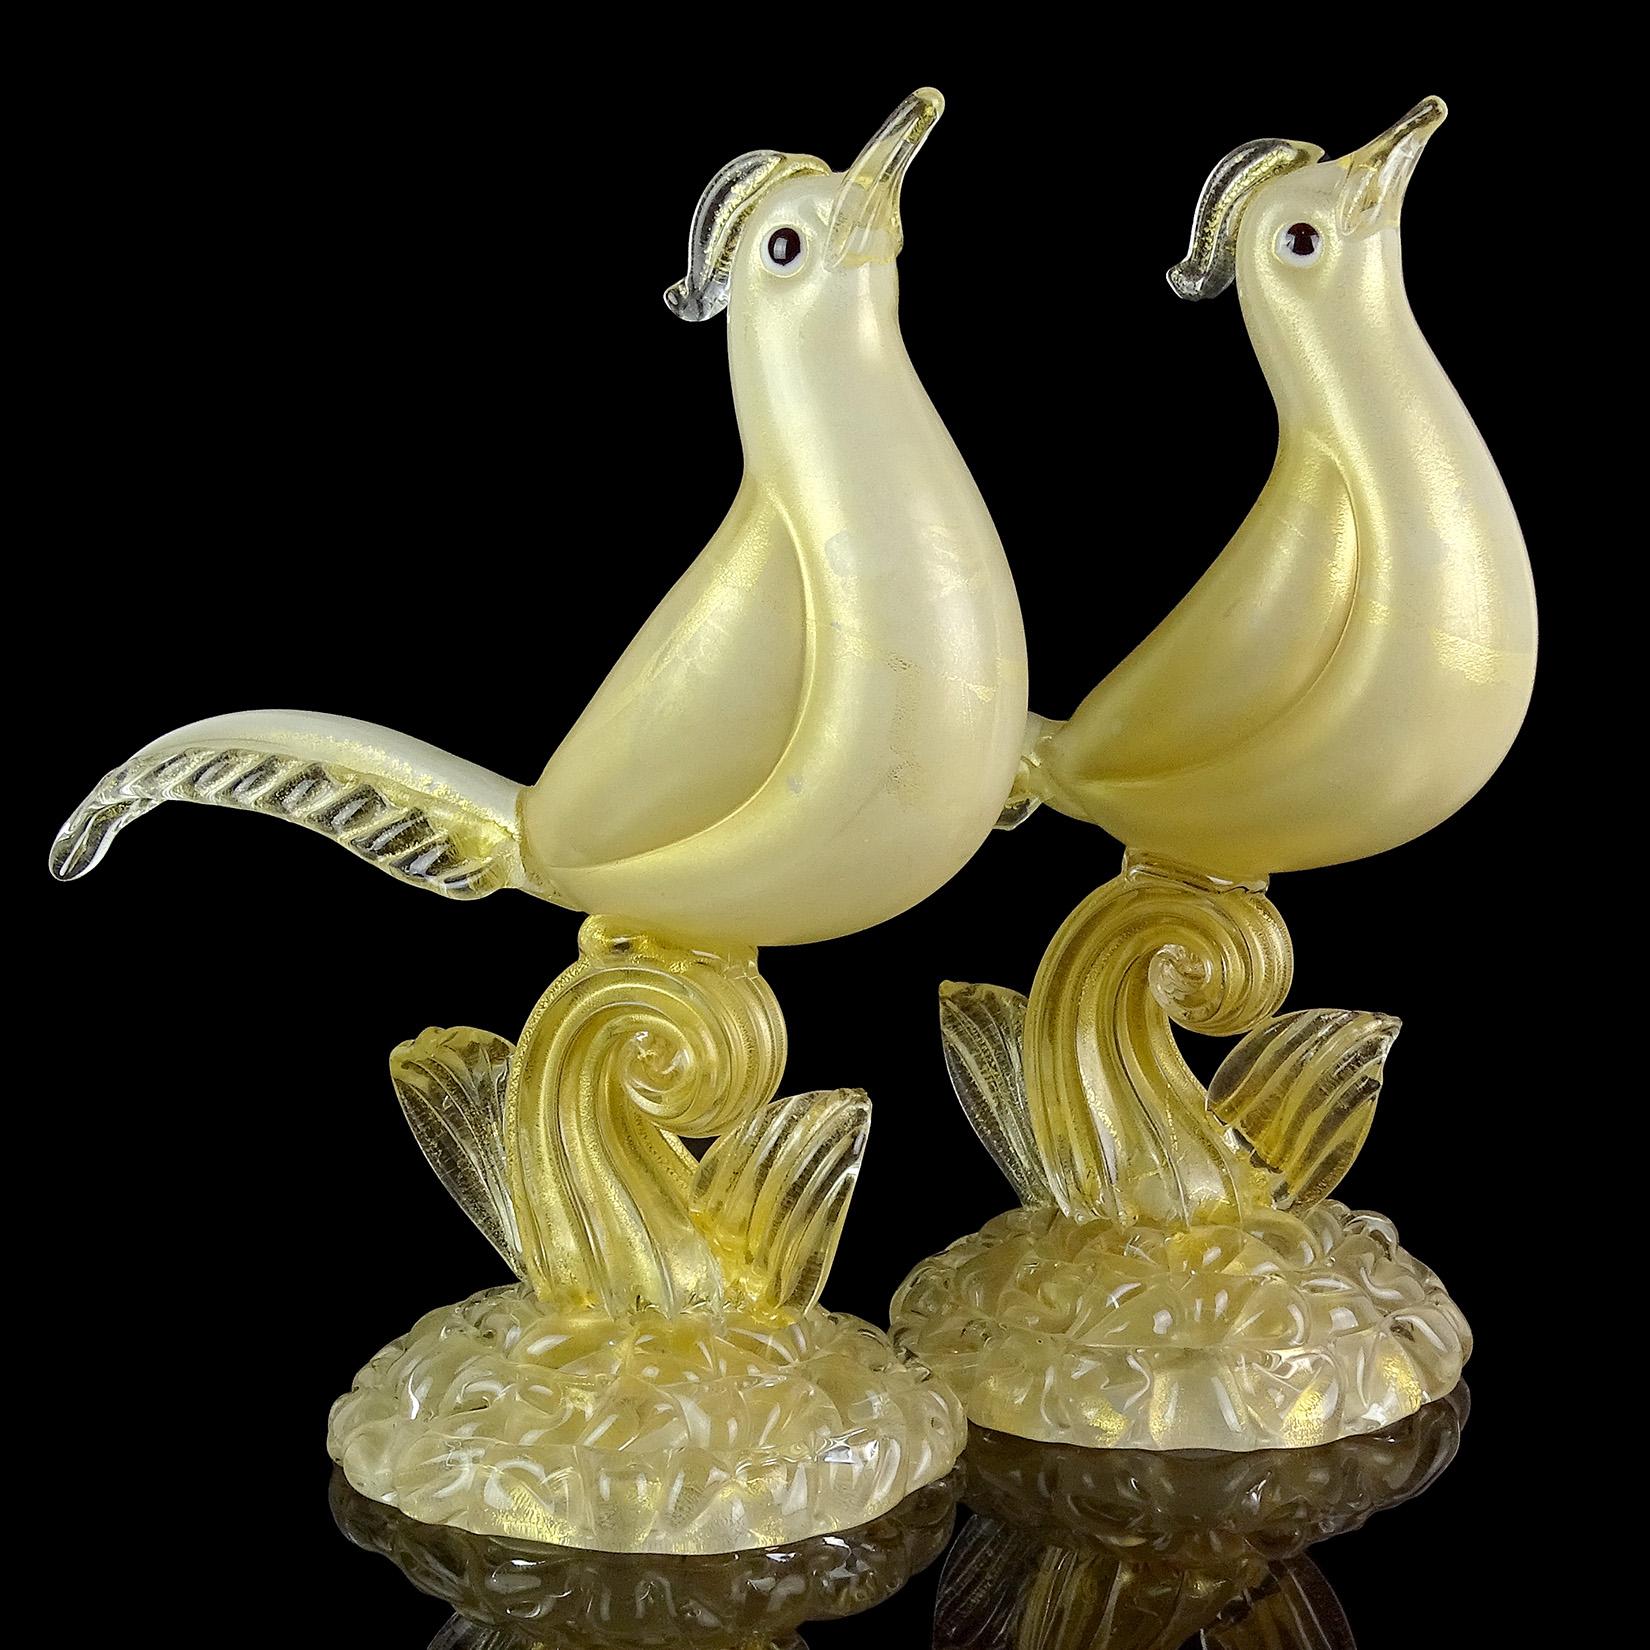 Priced per item (2 birds available as shown). Elegant and rare Murano hand blown white and gold flecks Italian art glass pheasant bird sculpture. Documented to designer Ercole Barovier, for the Barovier e Toso company. The base is done in the